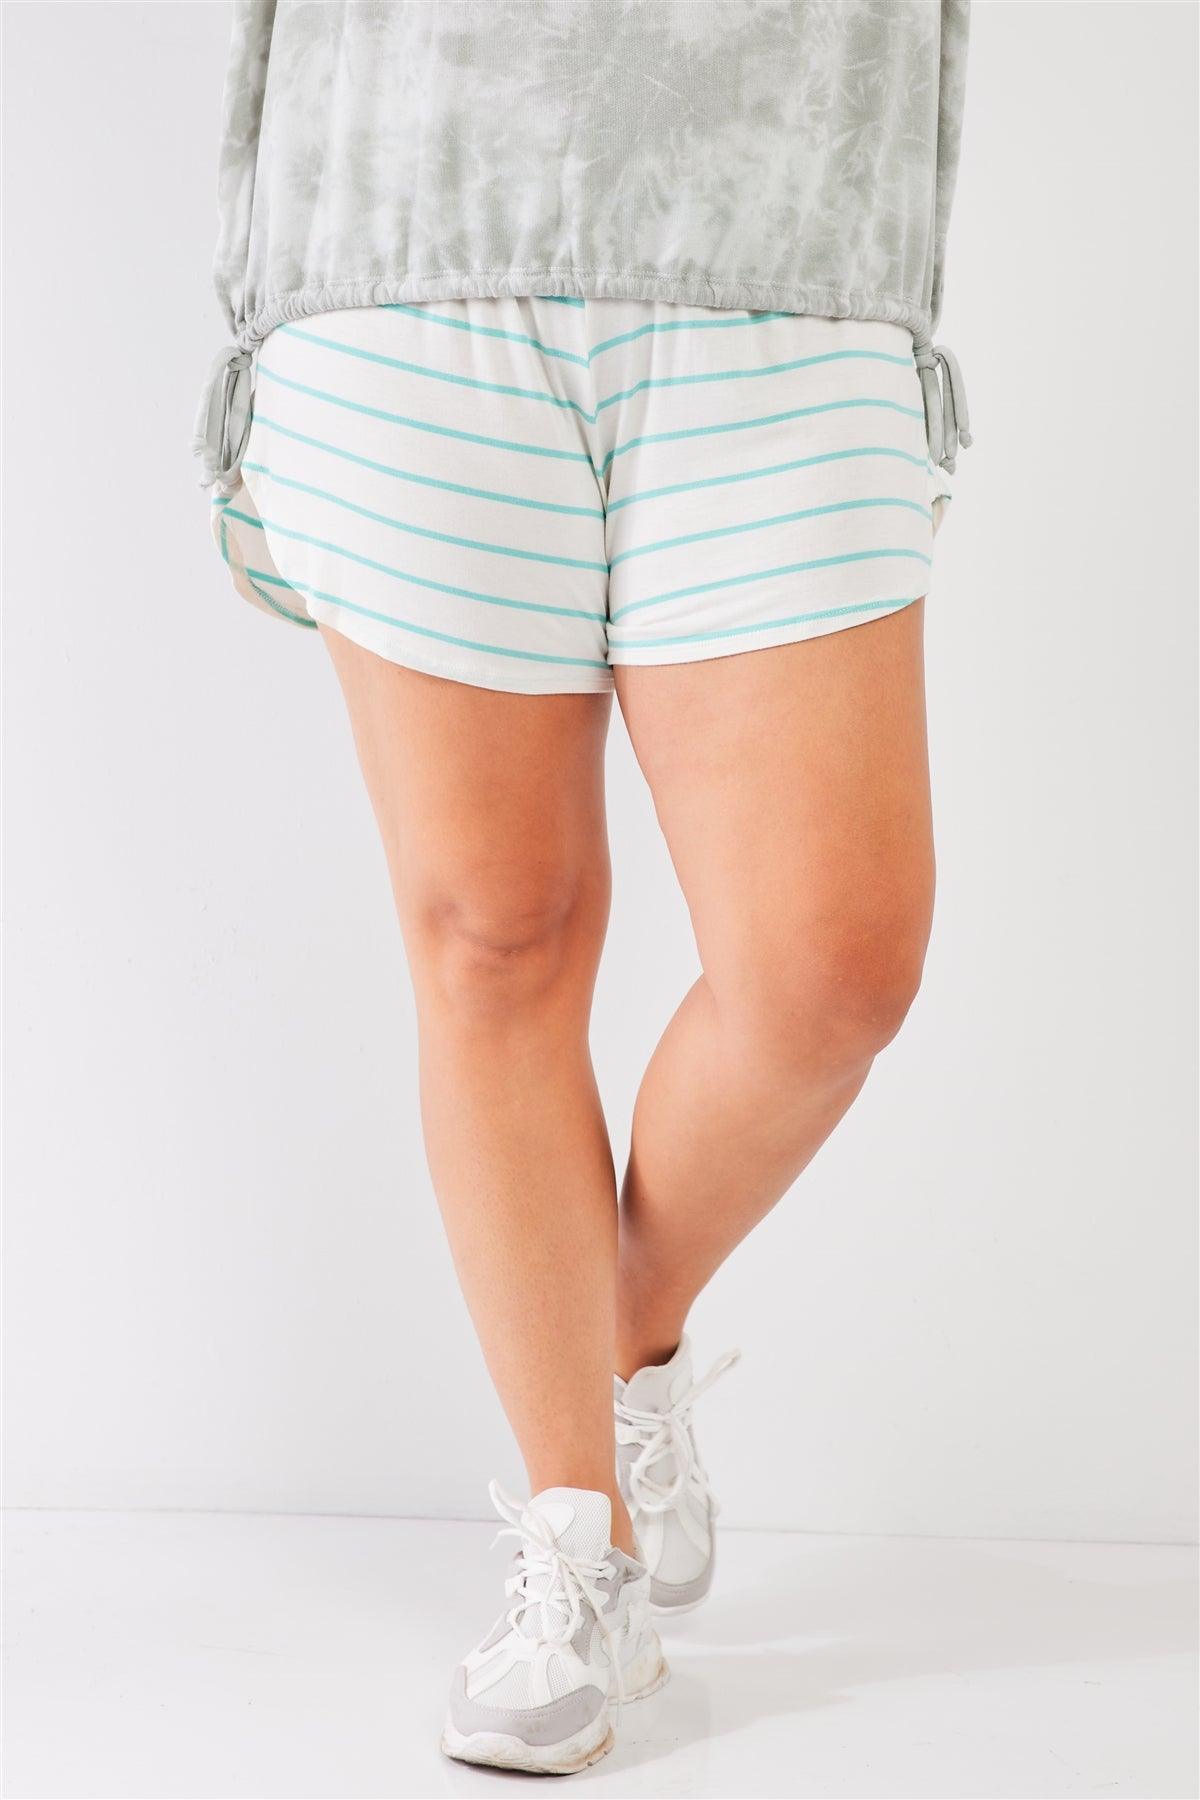 Junior Plus Size Ivory-Mint Striped High Waist Split Sides Relaxed Lounge Mini Shorts